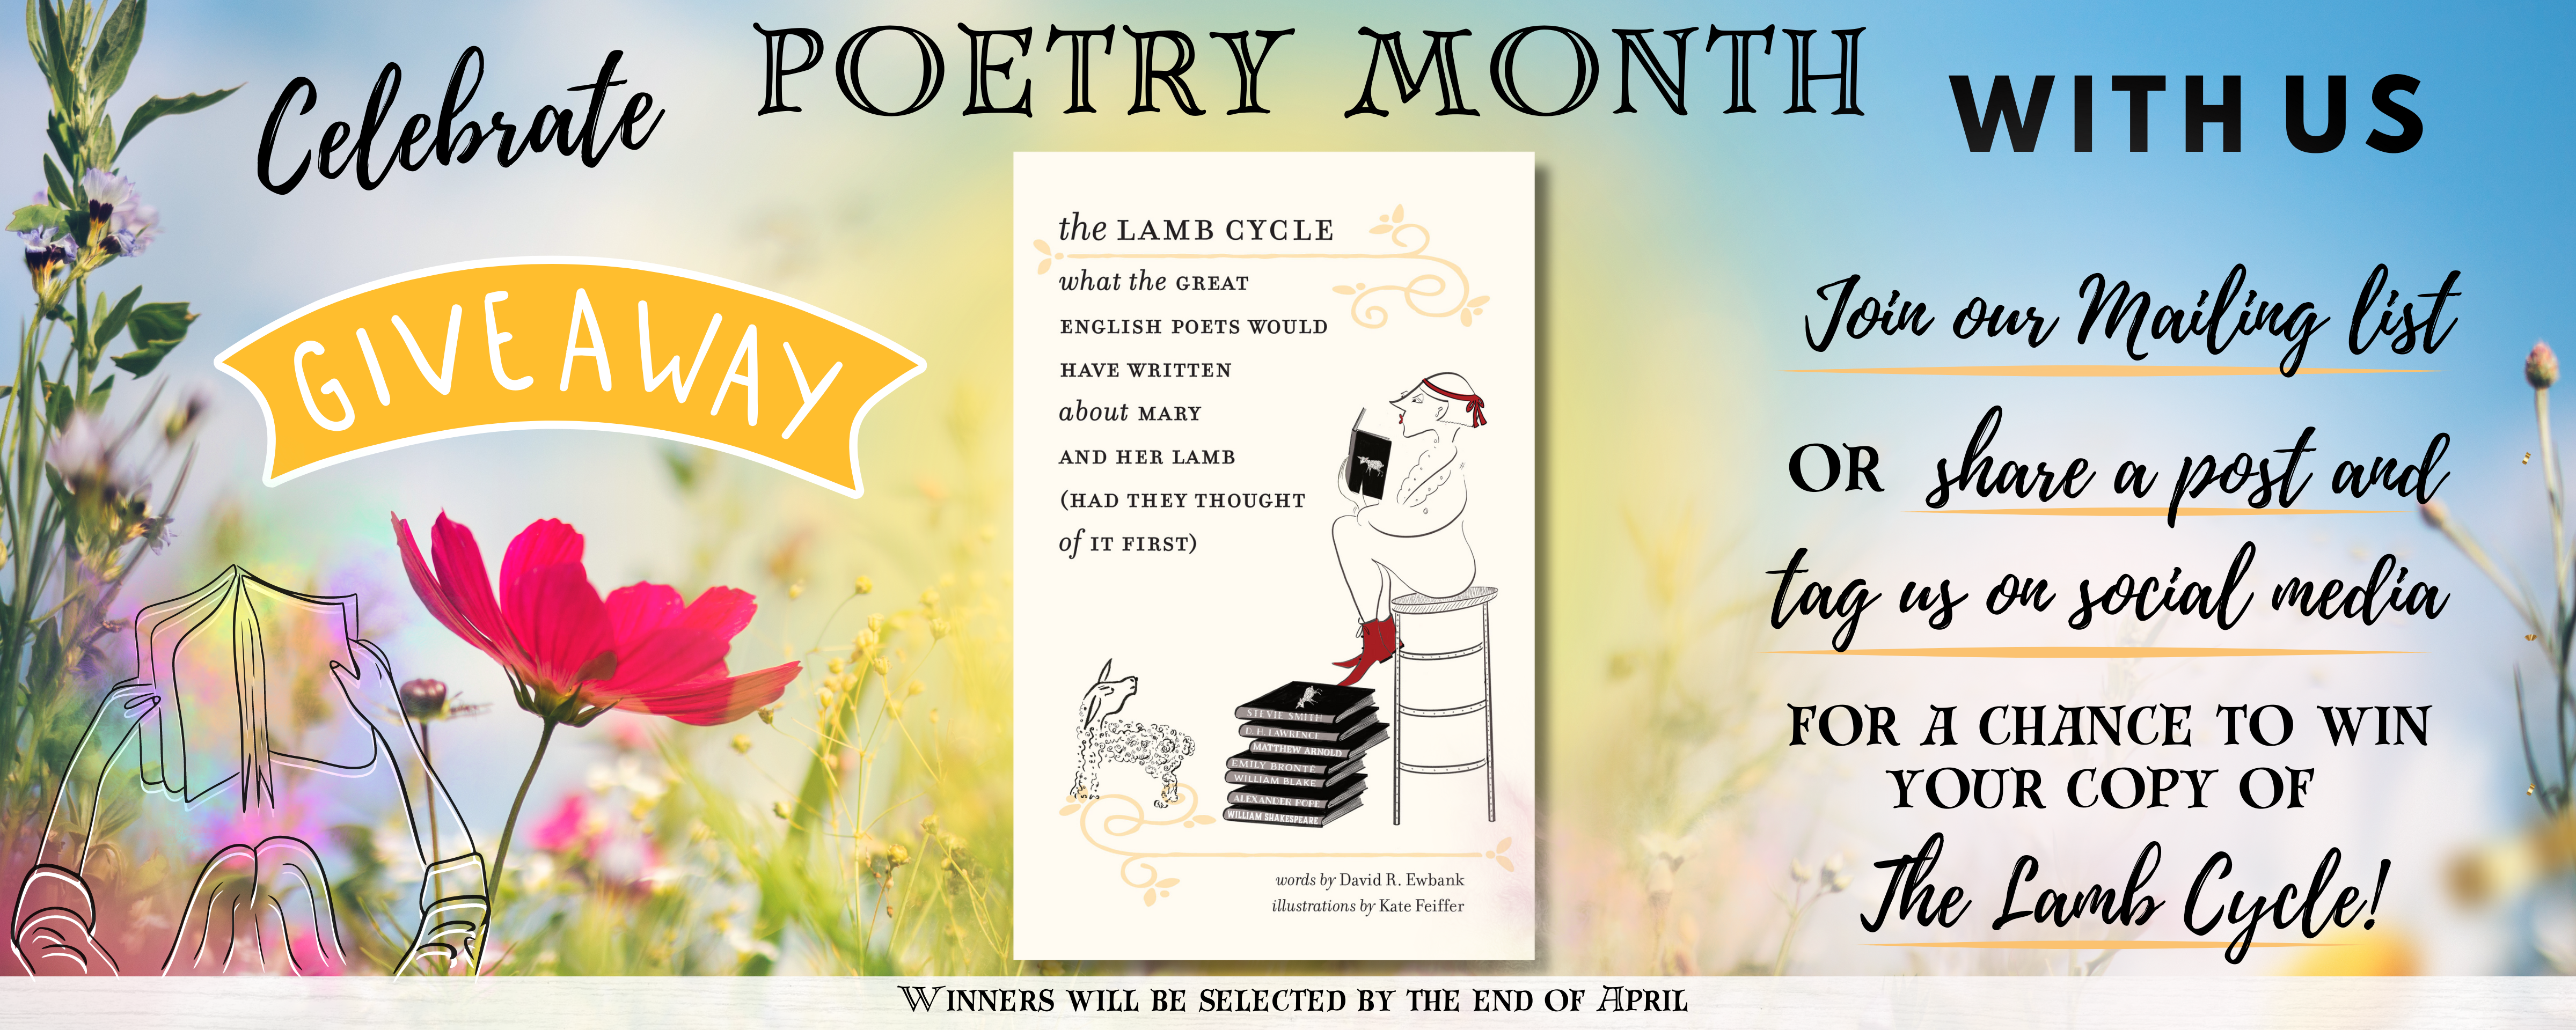 Celebrate with us Poetry Month. Join our mailing list or share a post and tag us on social media, to win your copy of the lamb cycle. Winners will be picked by the end of April.